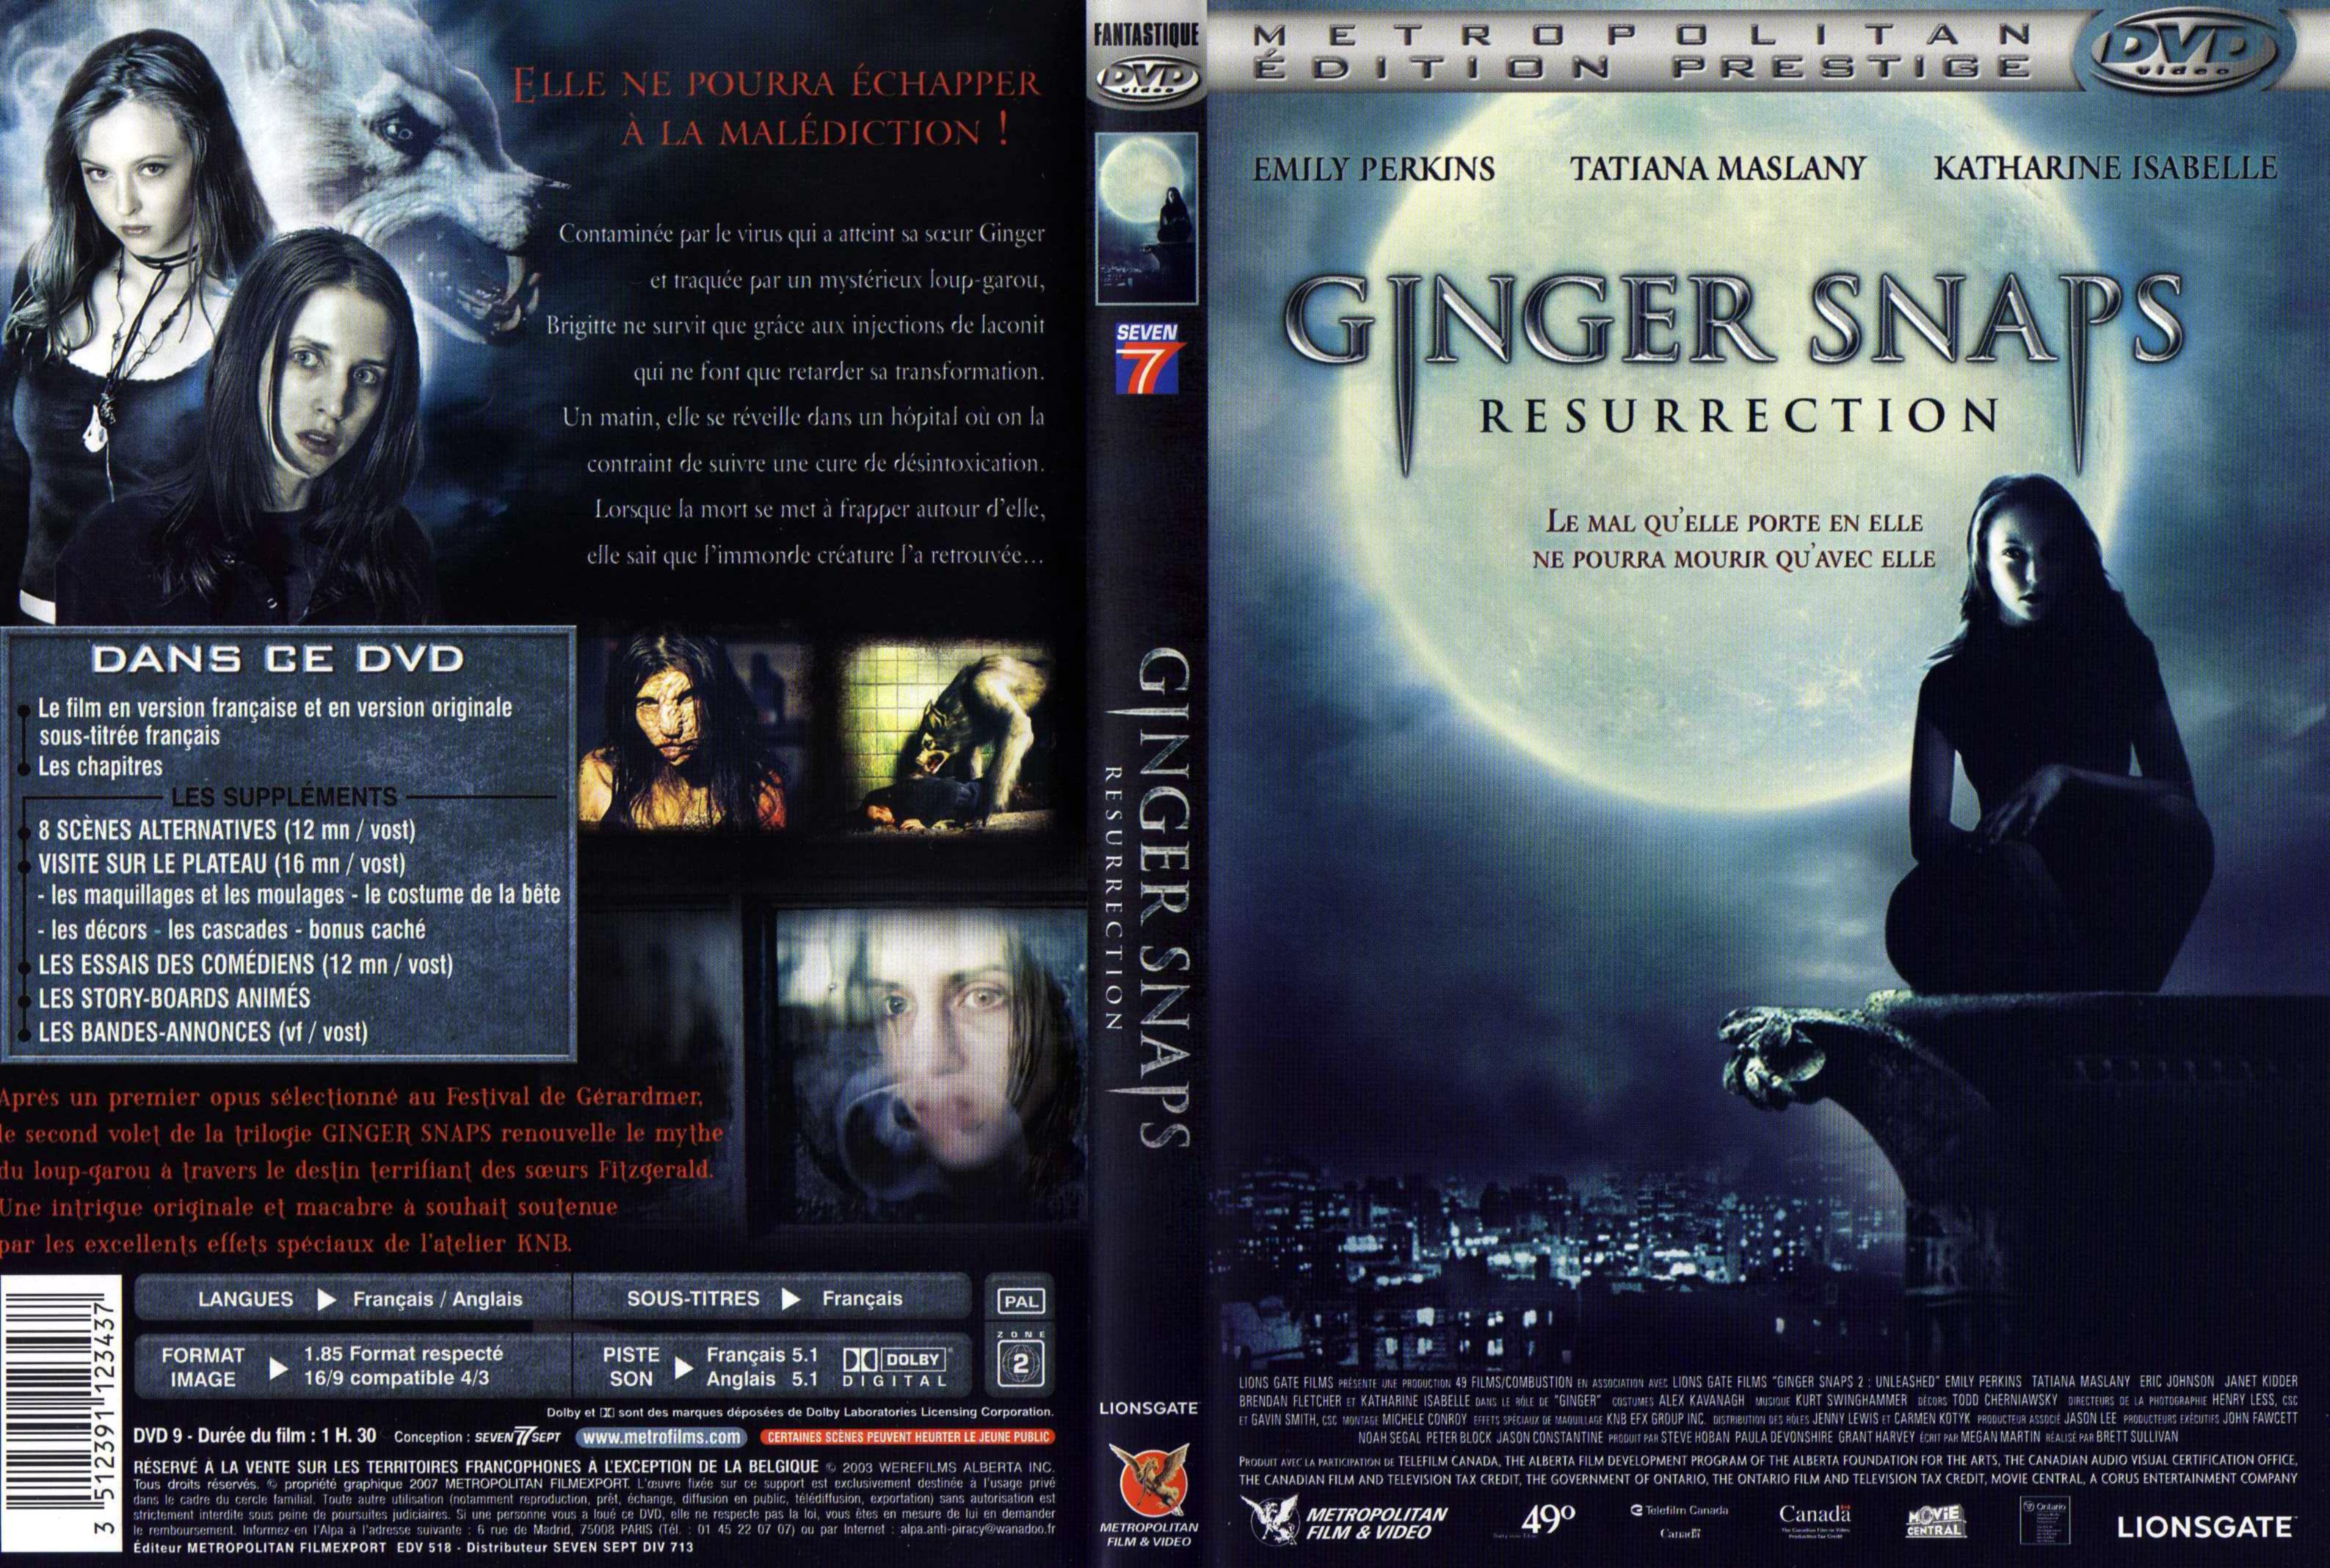 Jaquette DVD Ginger snaps 2